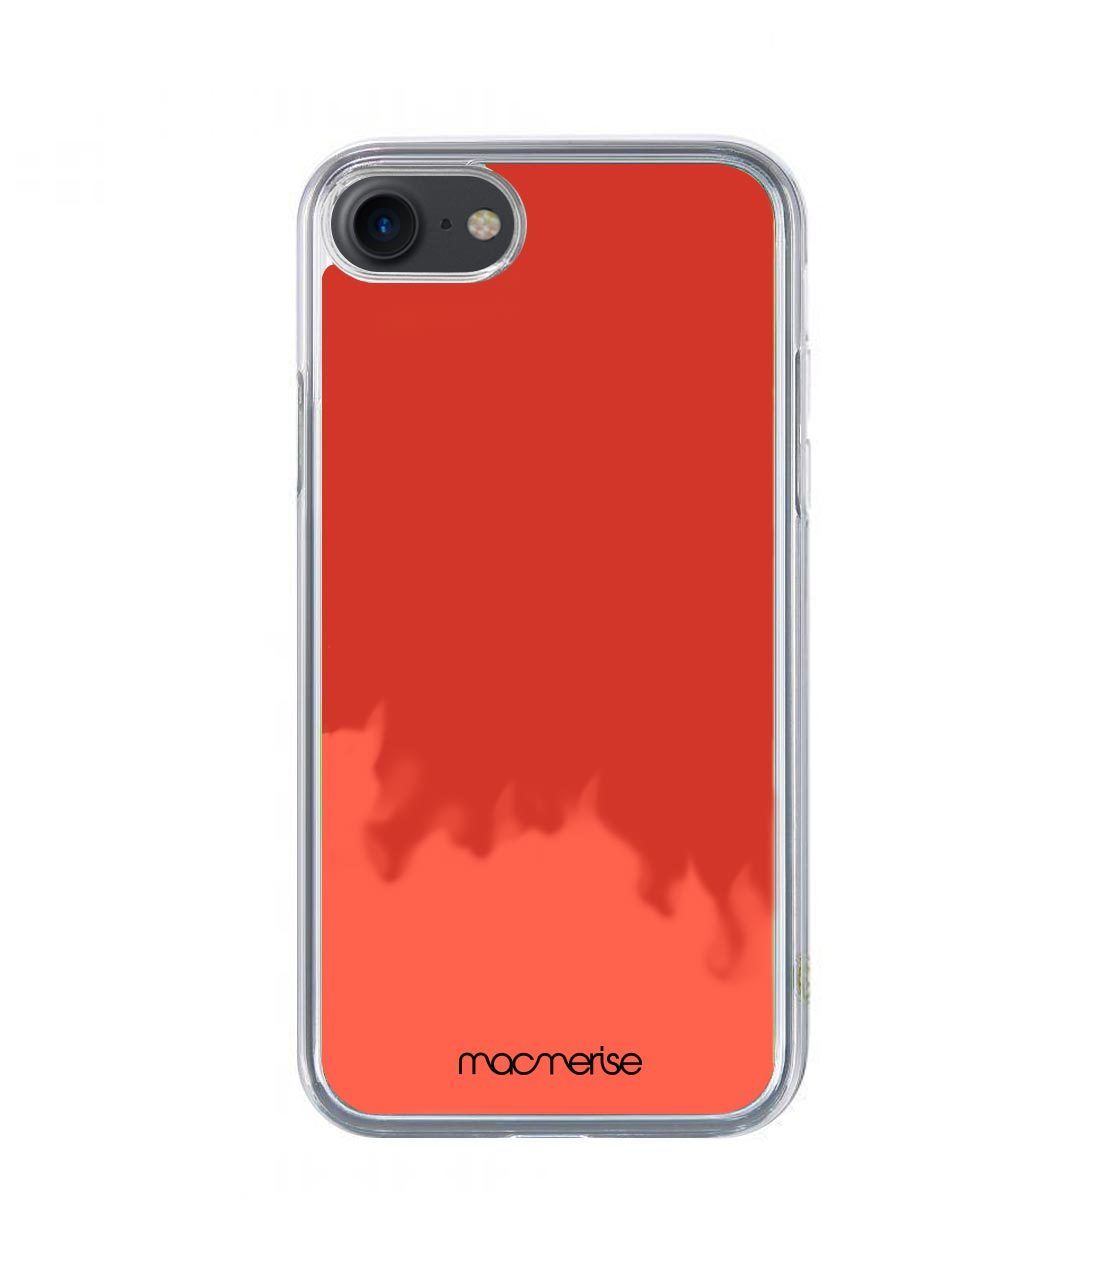 Neon Sand Red - Neon Sand Phone Case for iPhone 7